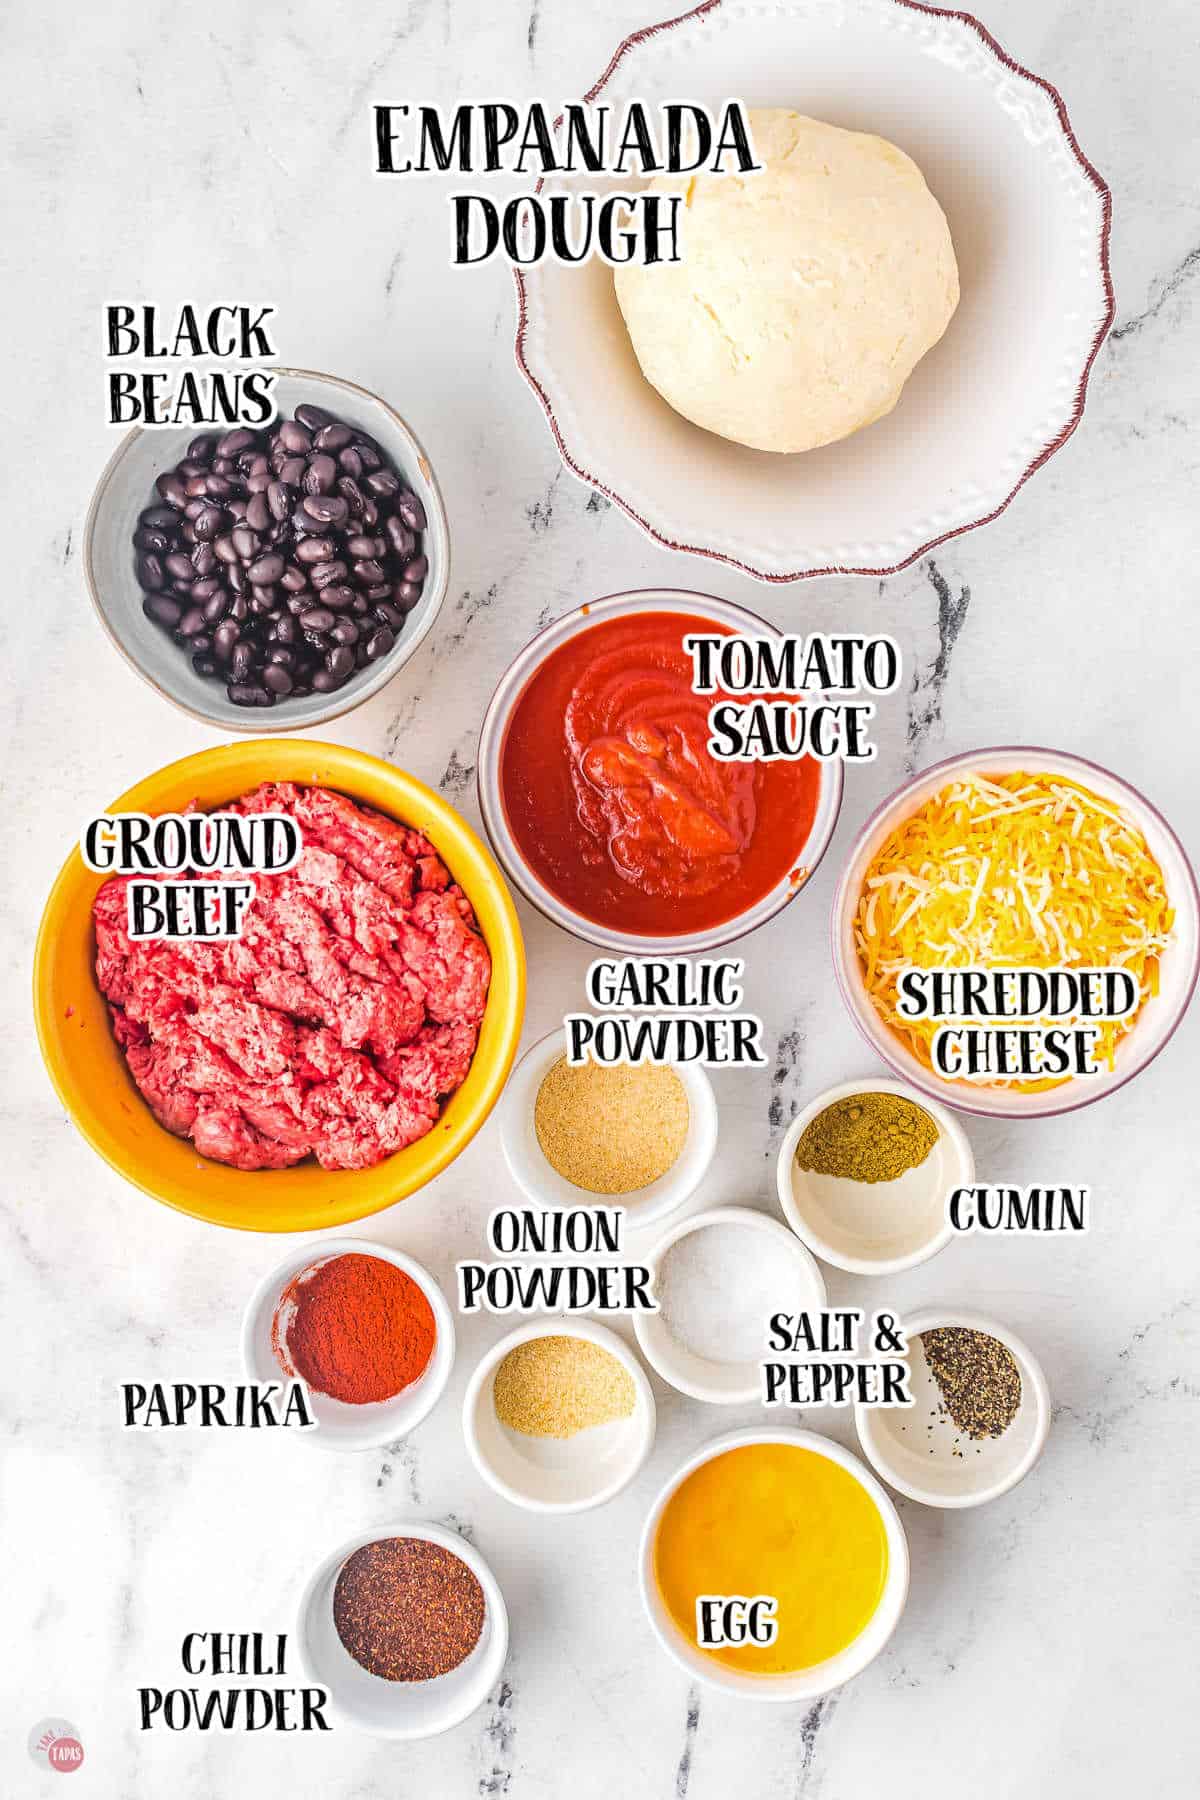 labeled picture of empanada ingredients